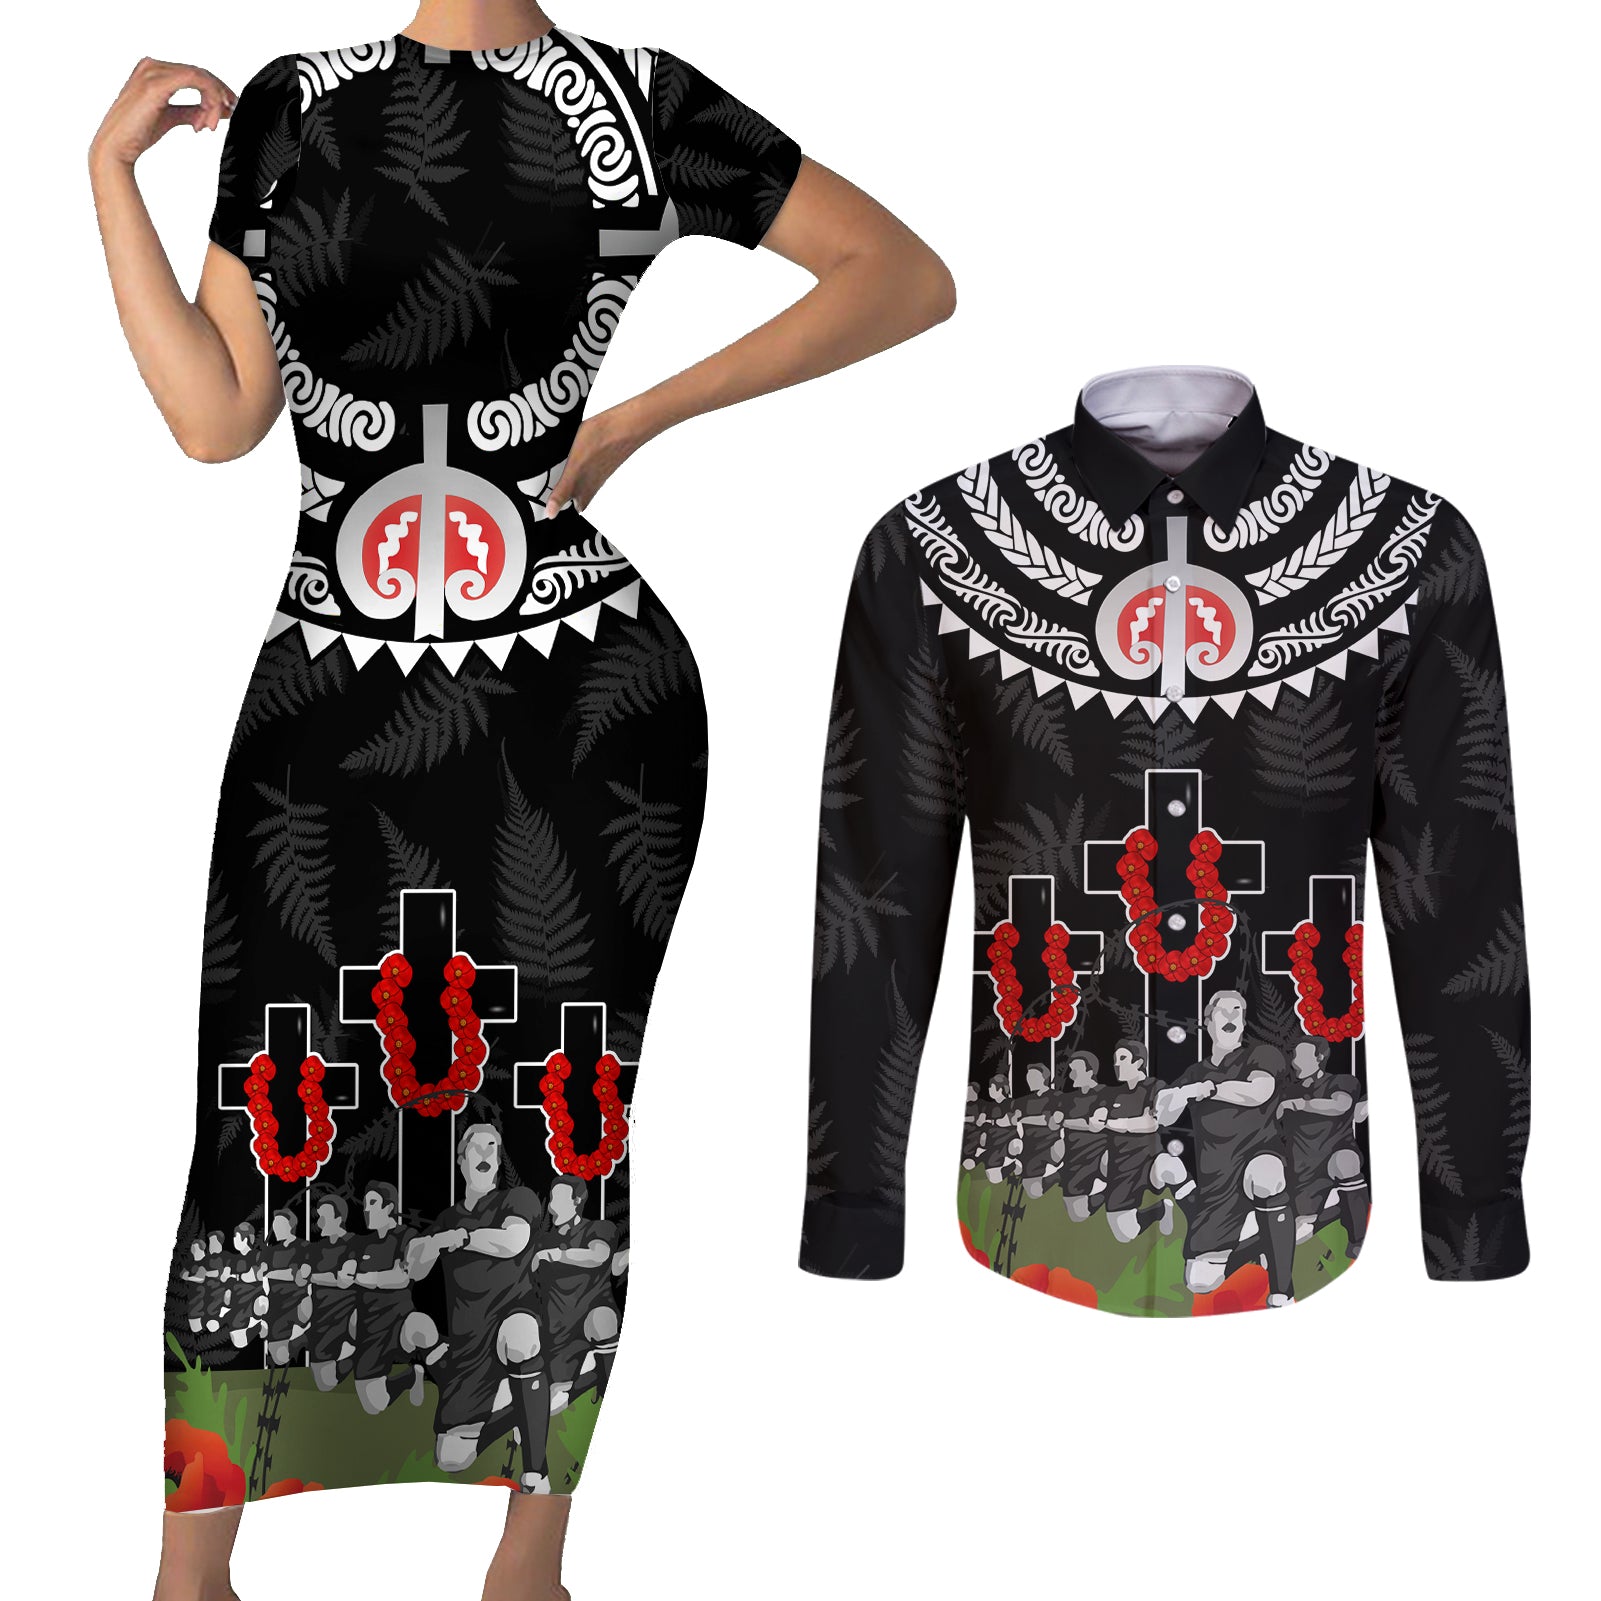 New Zealand ANZAC Day Couples Matching Short Sleeve Bodycon Dress and Long Sleeve Button Shirt Lest We Forget Haka Dance Respect LT03 Black - Polynesian Pride